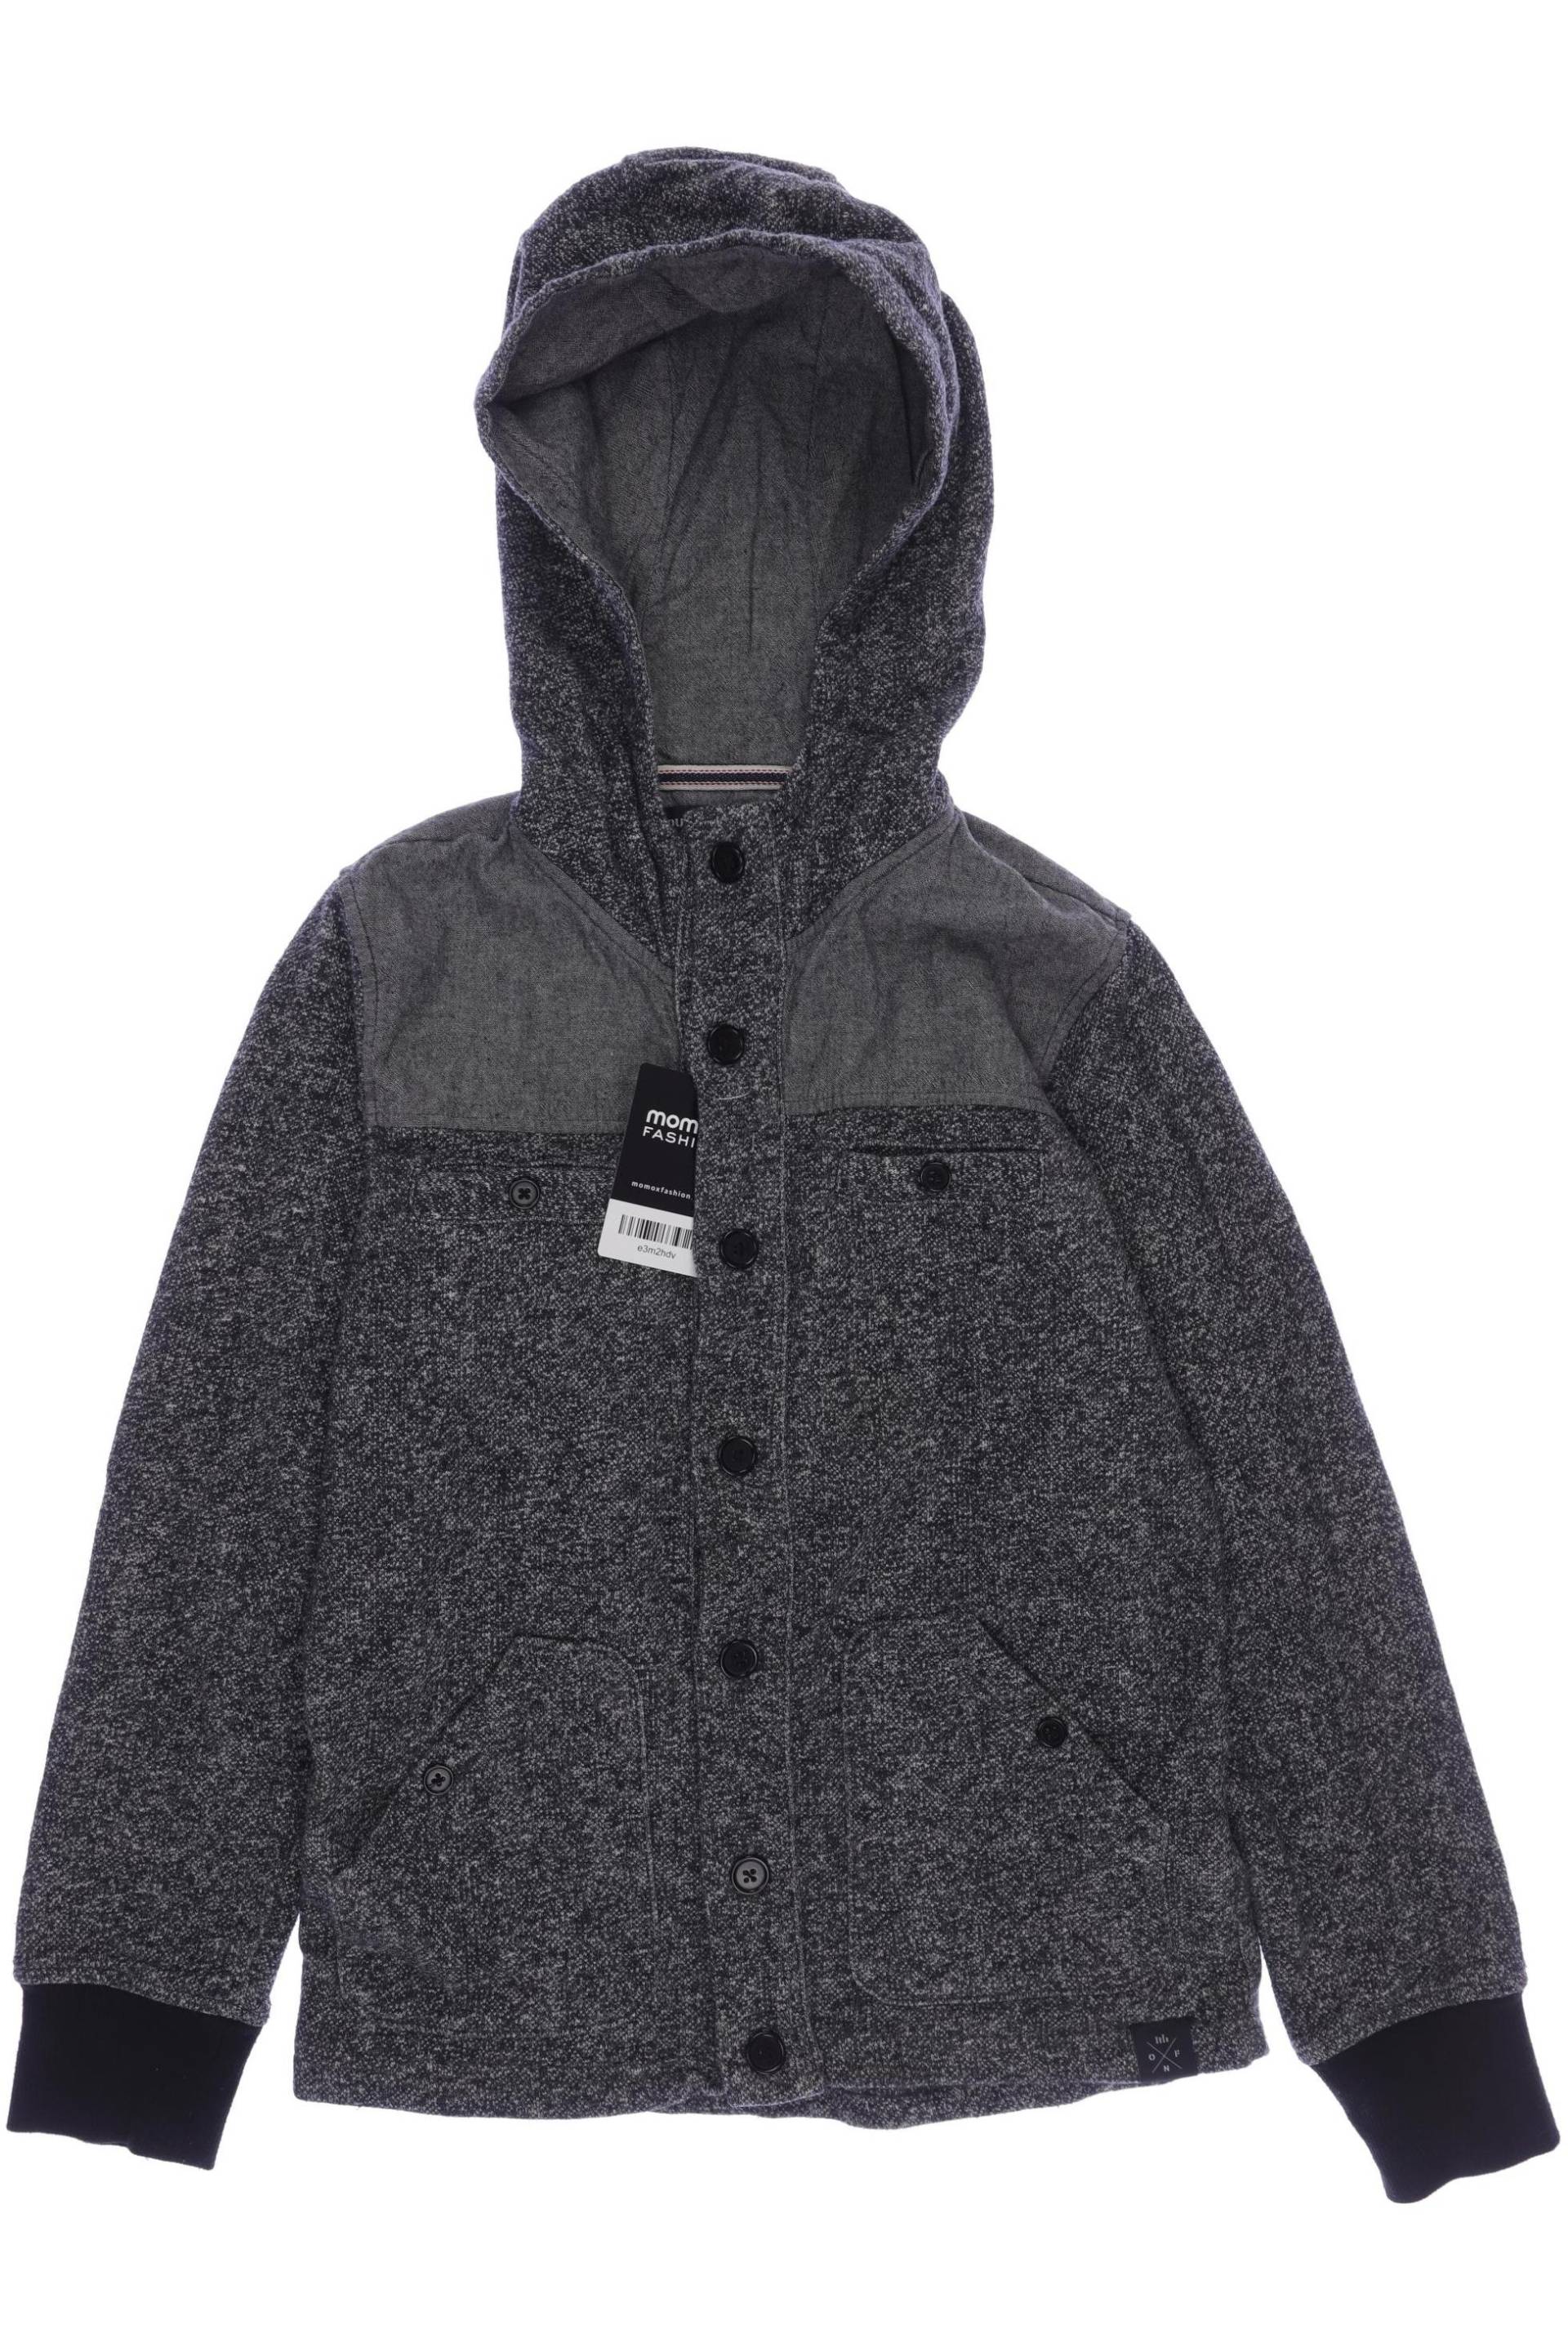 OUTFITTERS NATION Jungen Jacke, grau von OUTFITTERS NATION